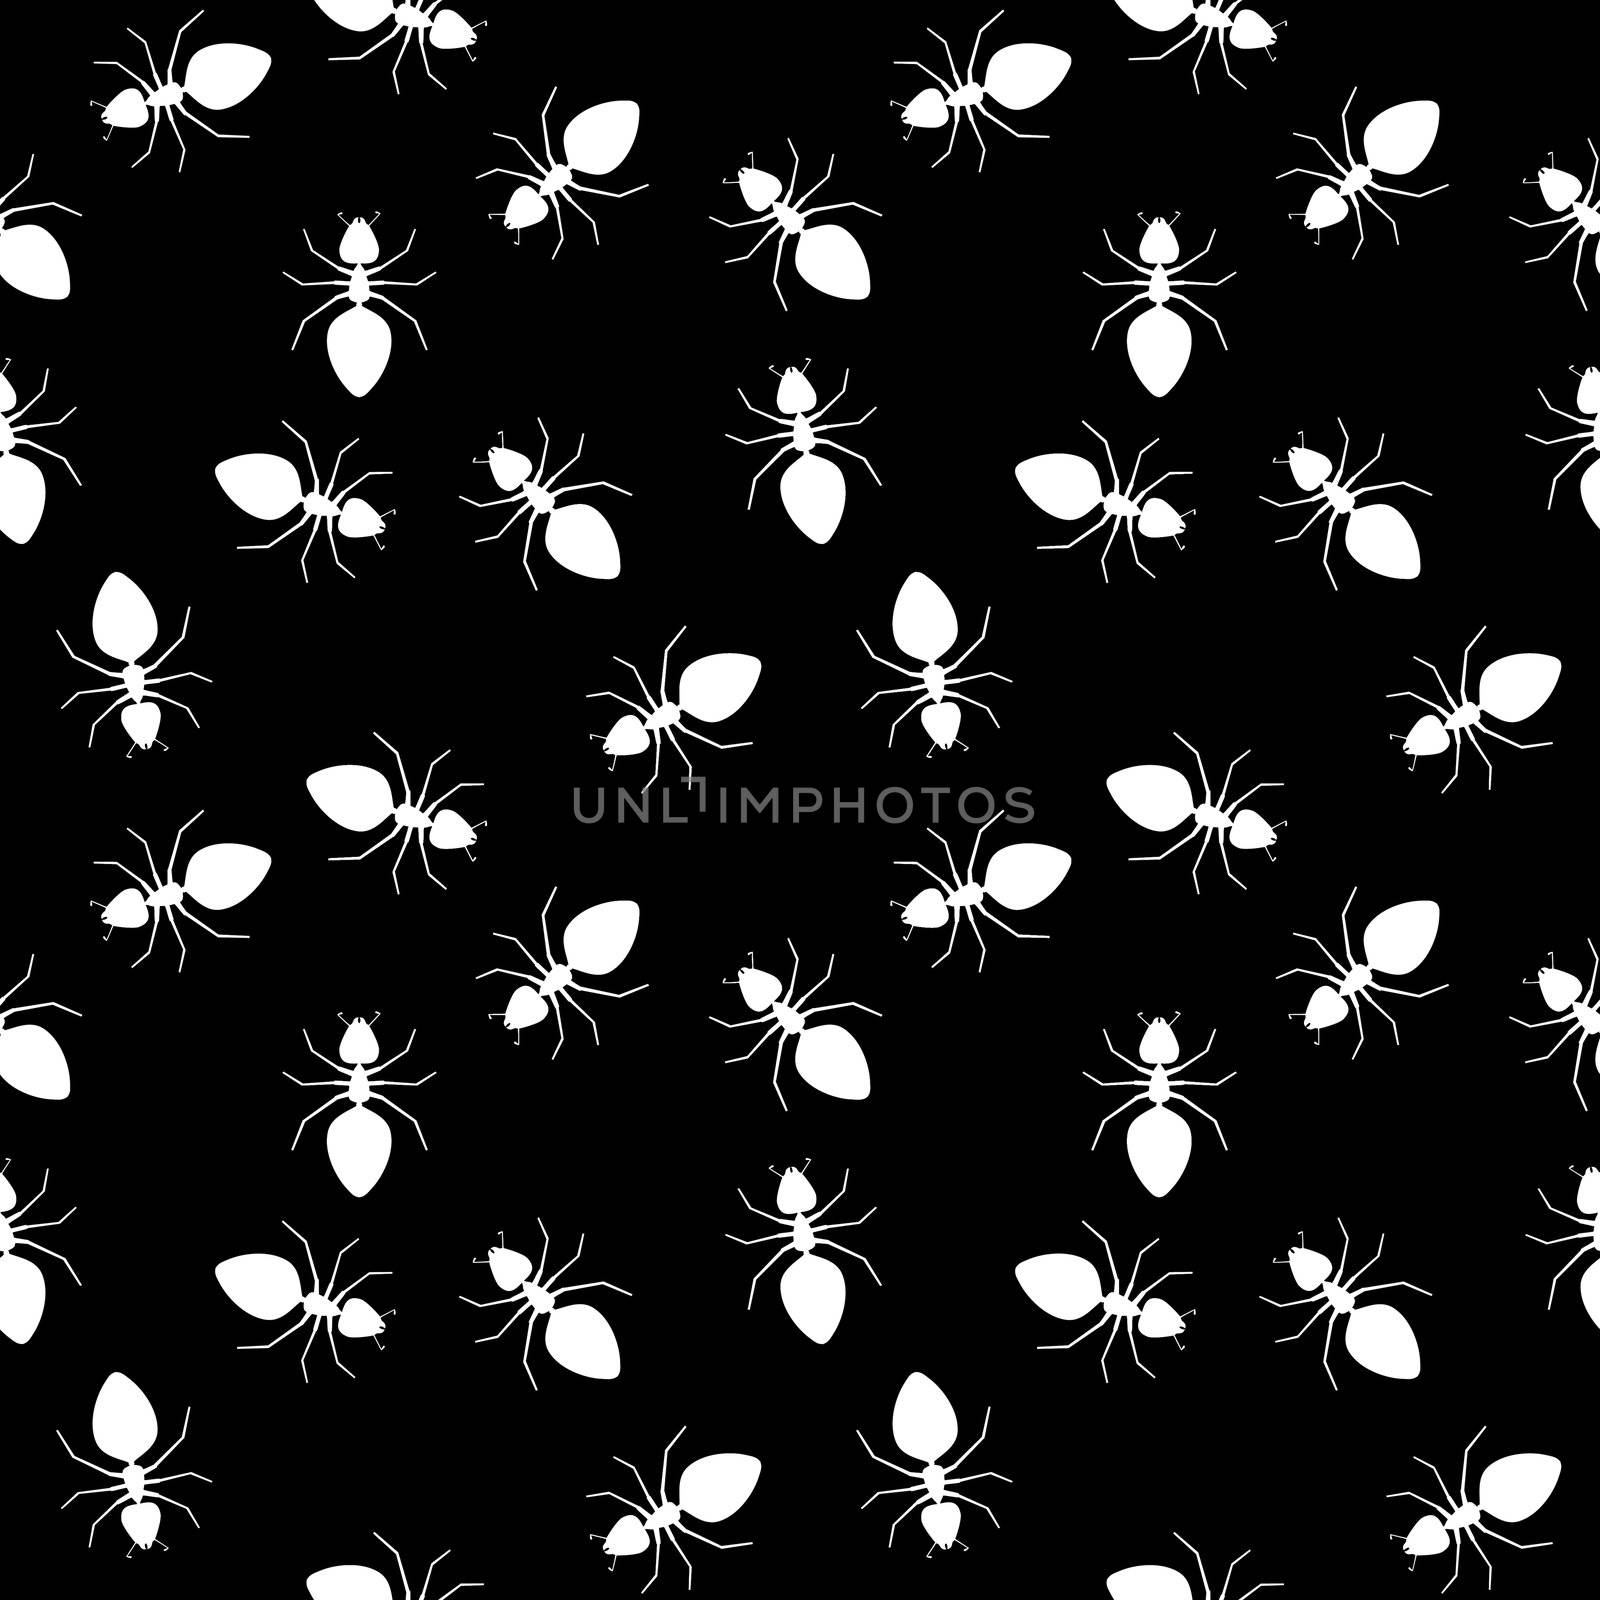 Seamless texture - insects parasites on black by pzaxe